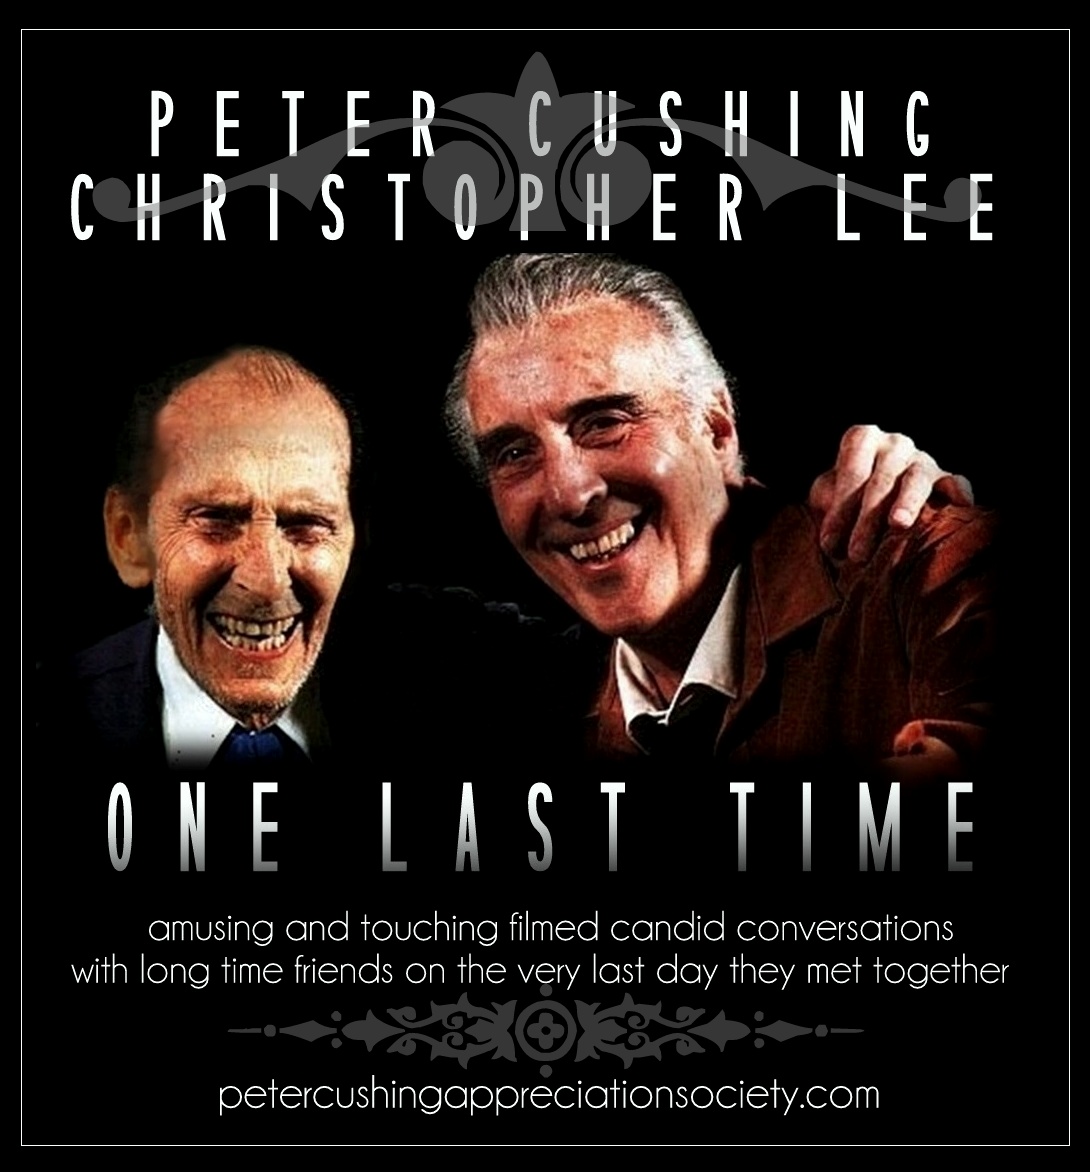 PETER CUSHING AND CHRISTOPHER LEE ONE LAST TIME : COMPLETE SERIES OF CLIPS